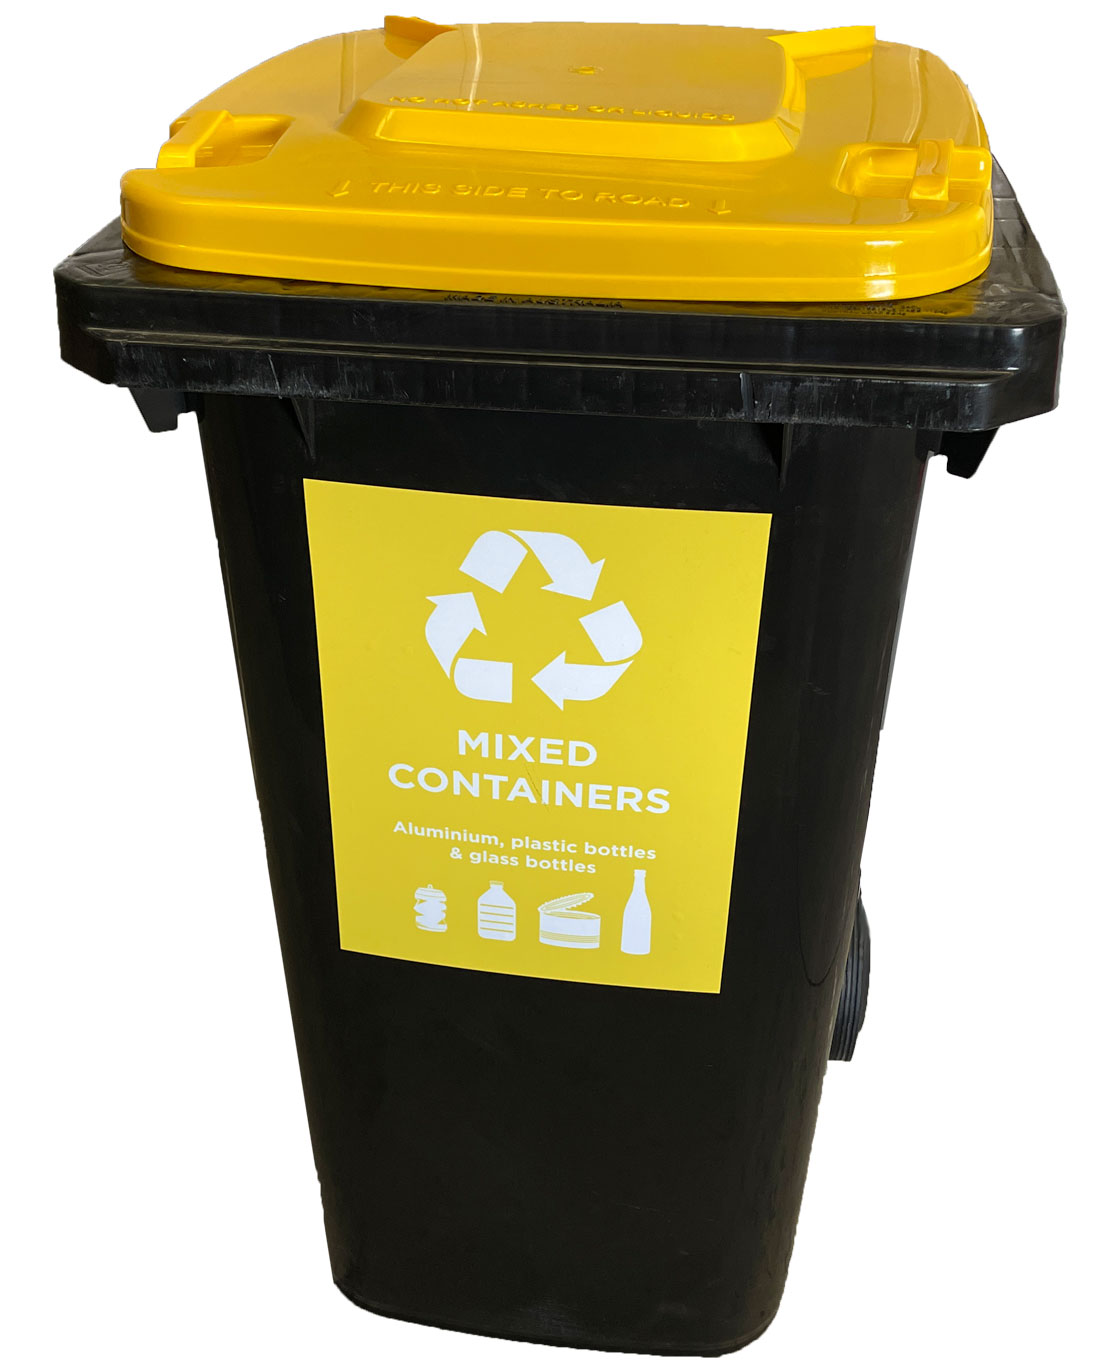 240-litre-wheelie-bin-in-black-with-yellow-lid-with-mixed-containers